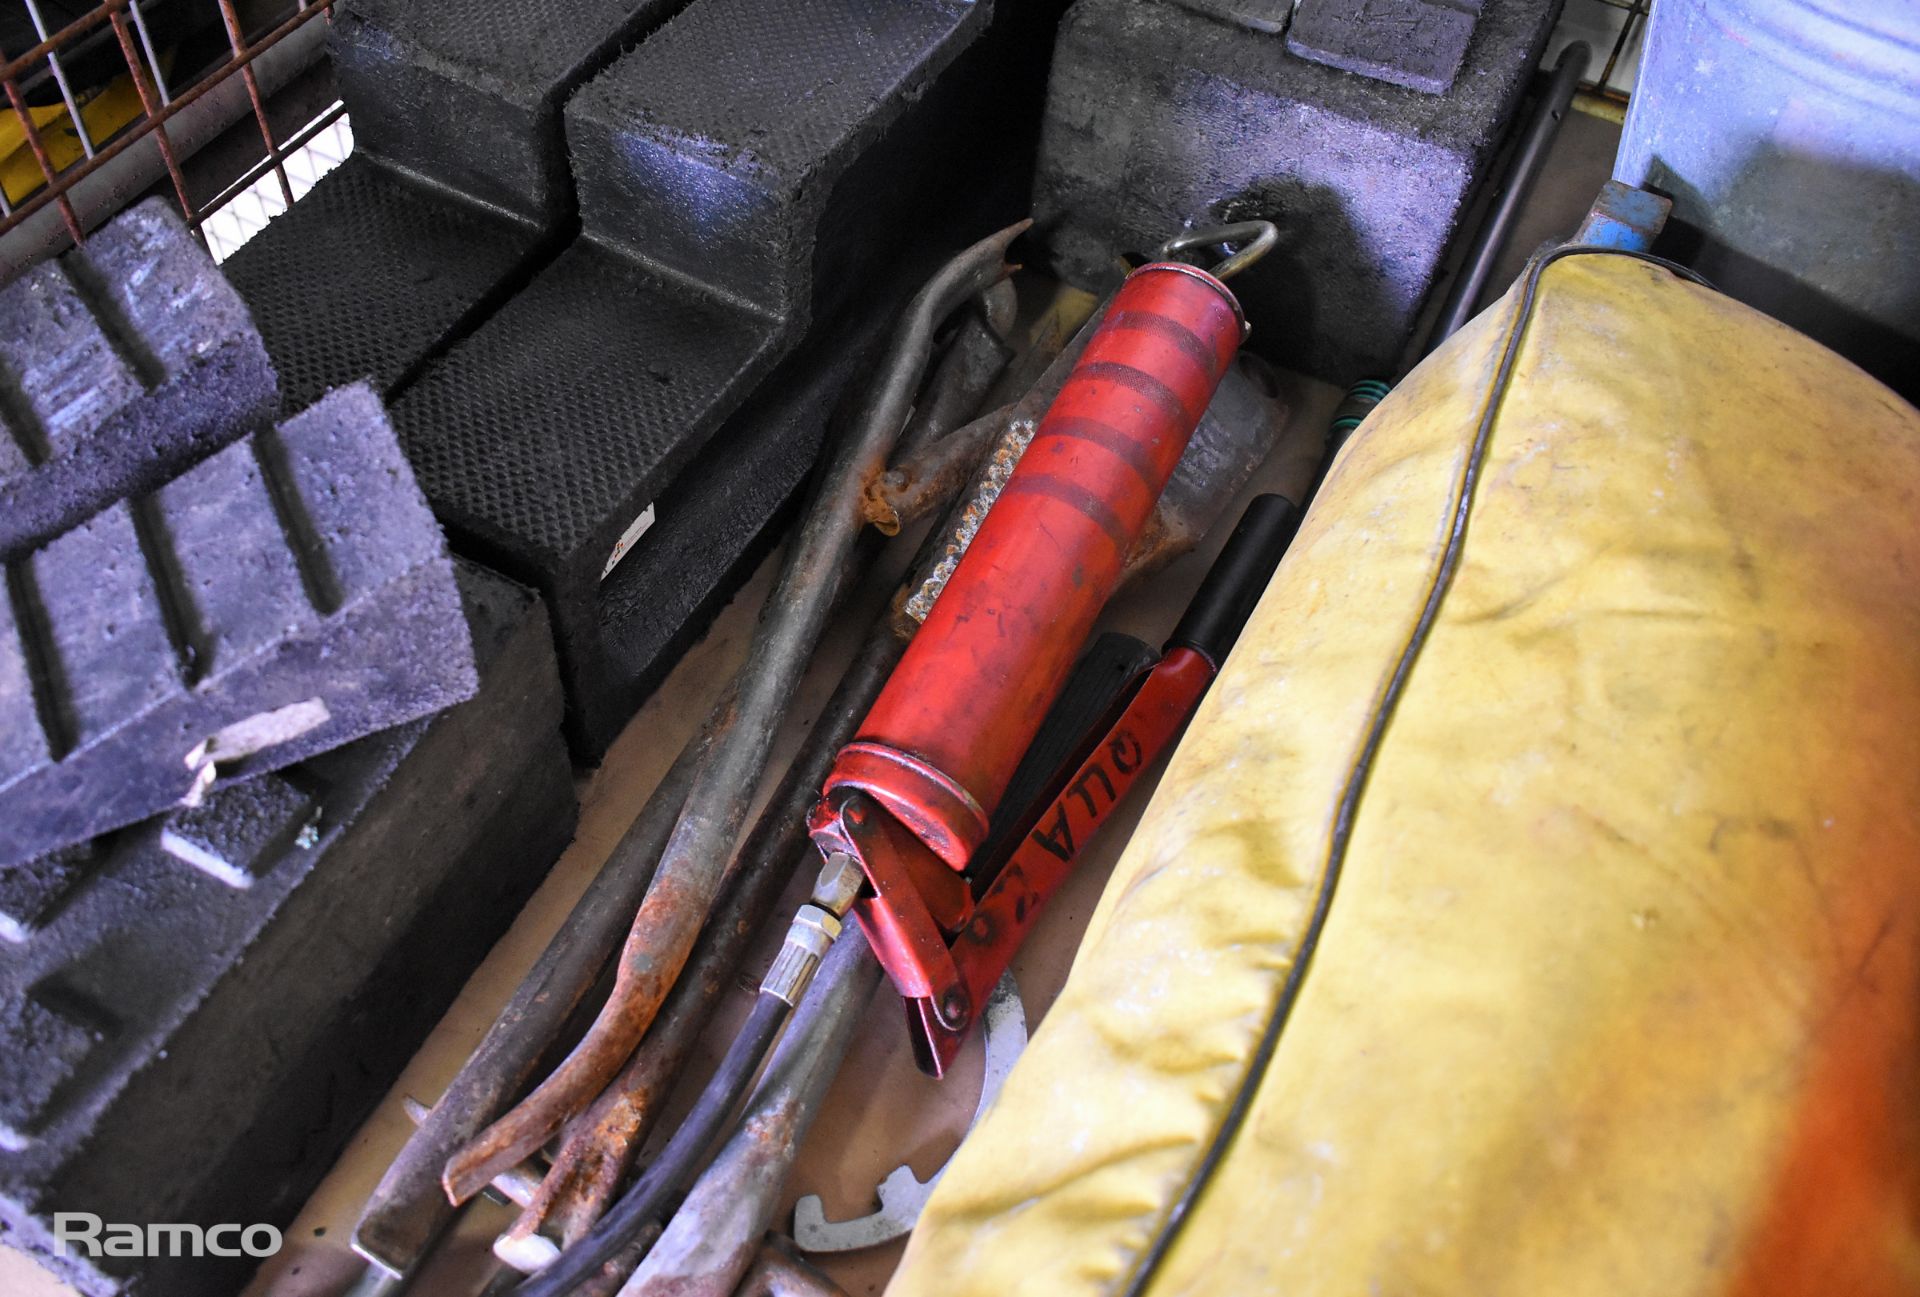 Fire and rescue accessories - hand tools, RTC chocks & blocks, ropes, lights, chemical sorbent pads - Image 5 of 13